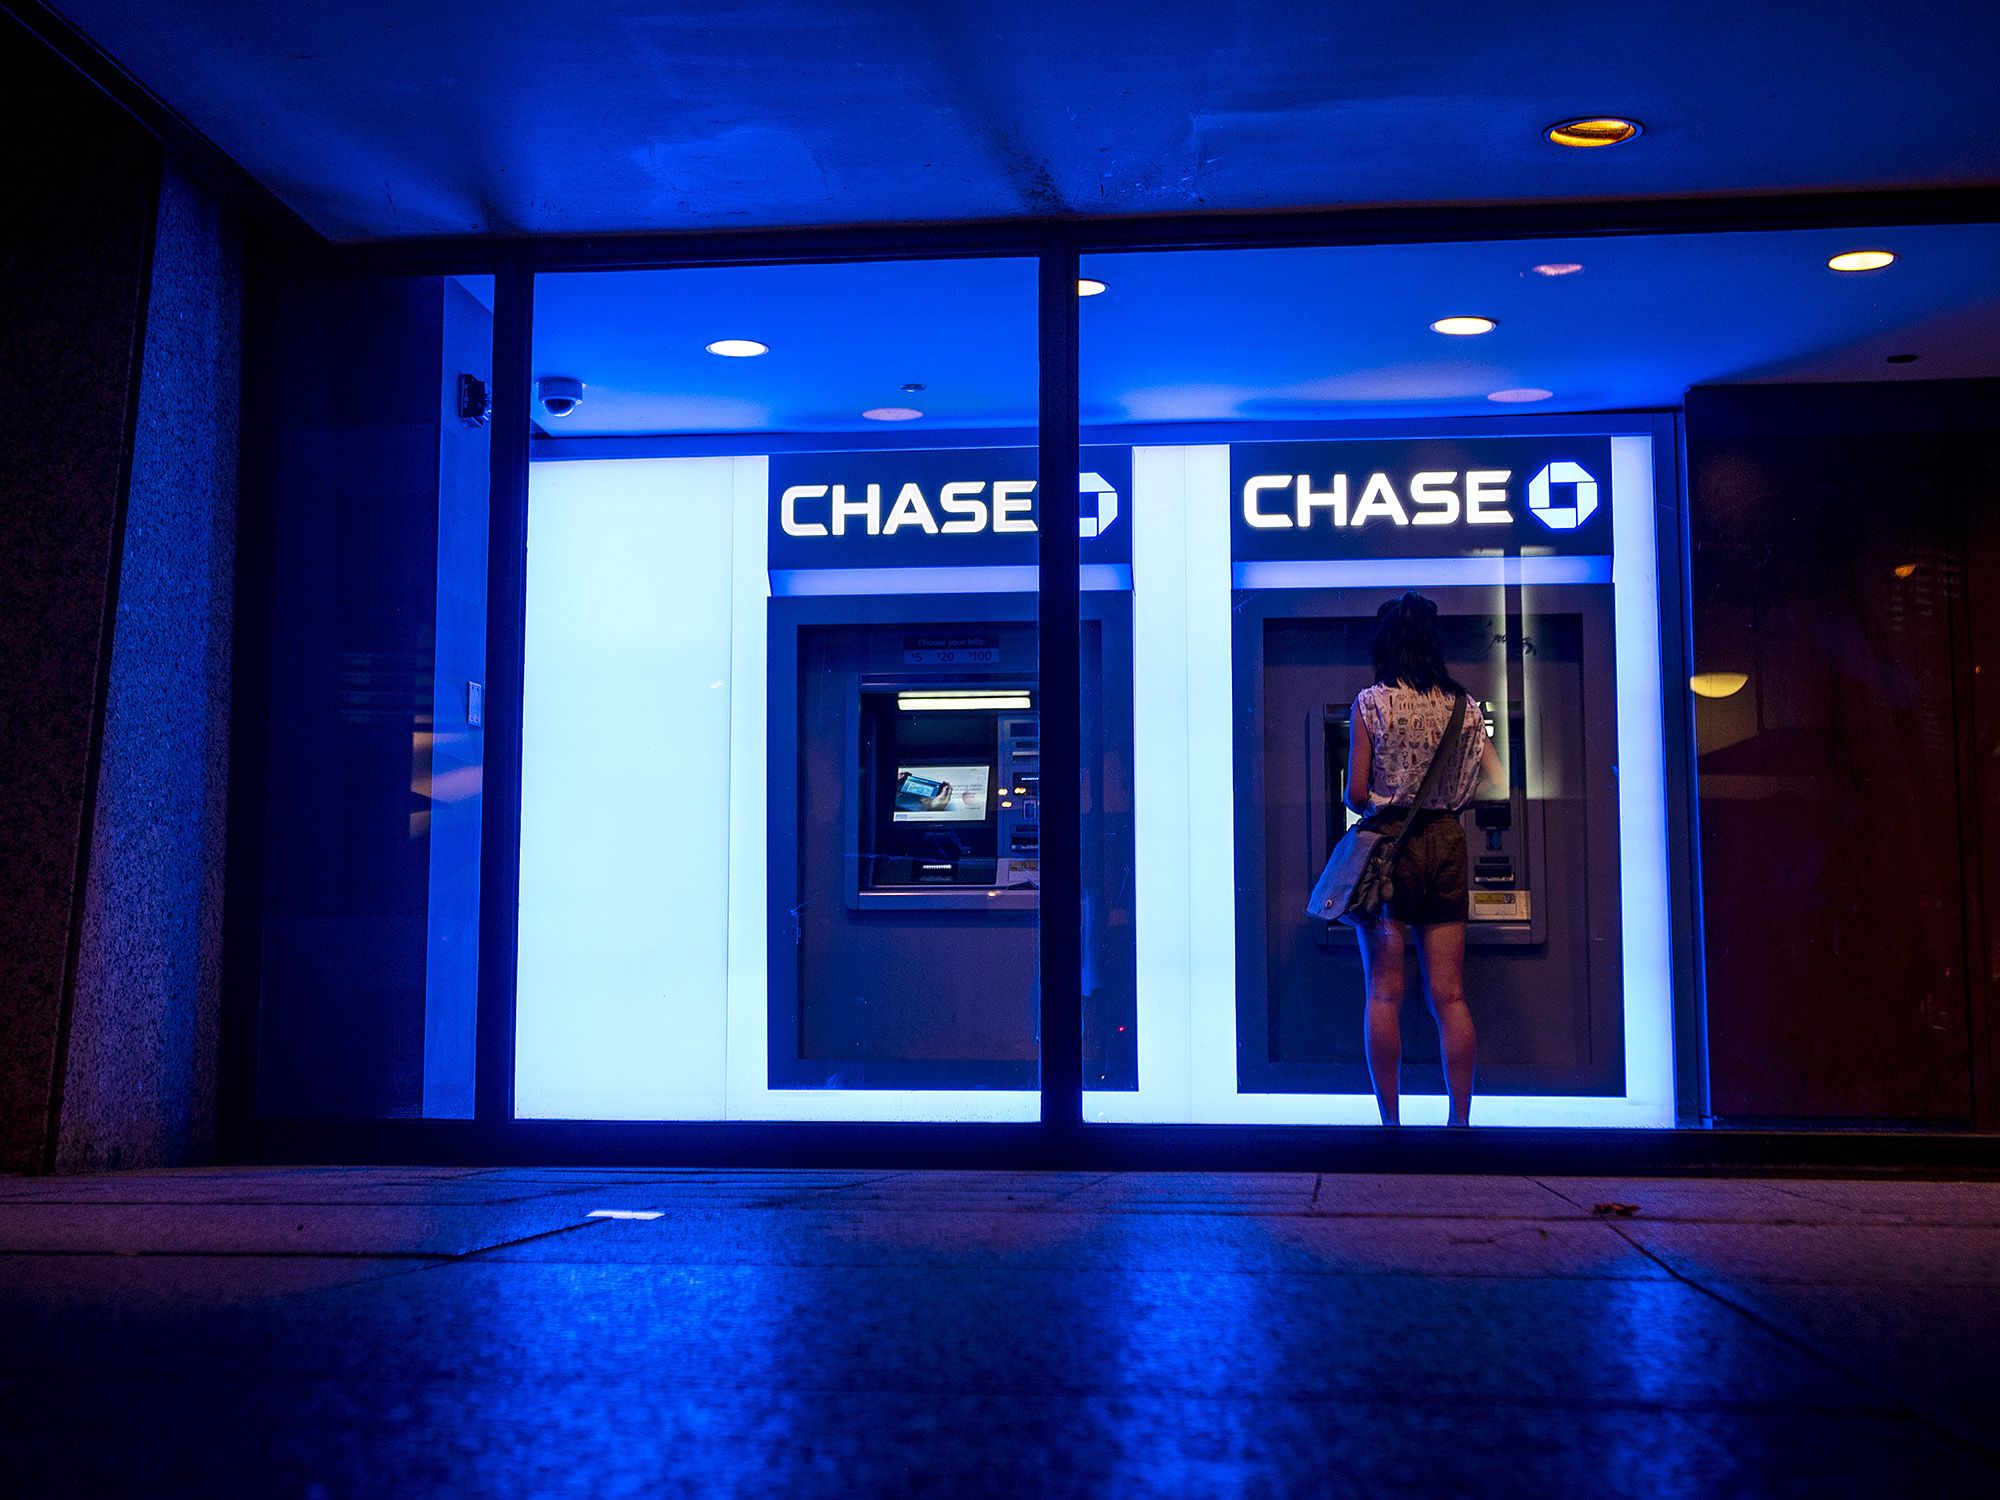 A customer uses an automatic teller machine (ATM) at a JPMorgan Chase & Co. bank branch in Chicago. Photographer: Christopher Dilts/Bloomberg